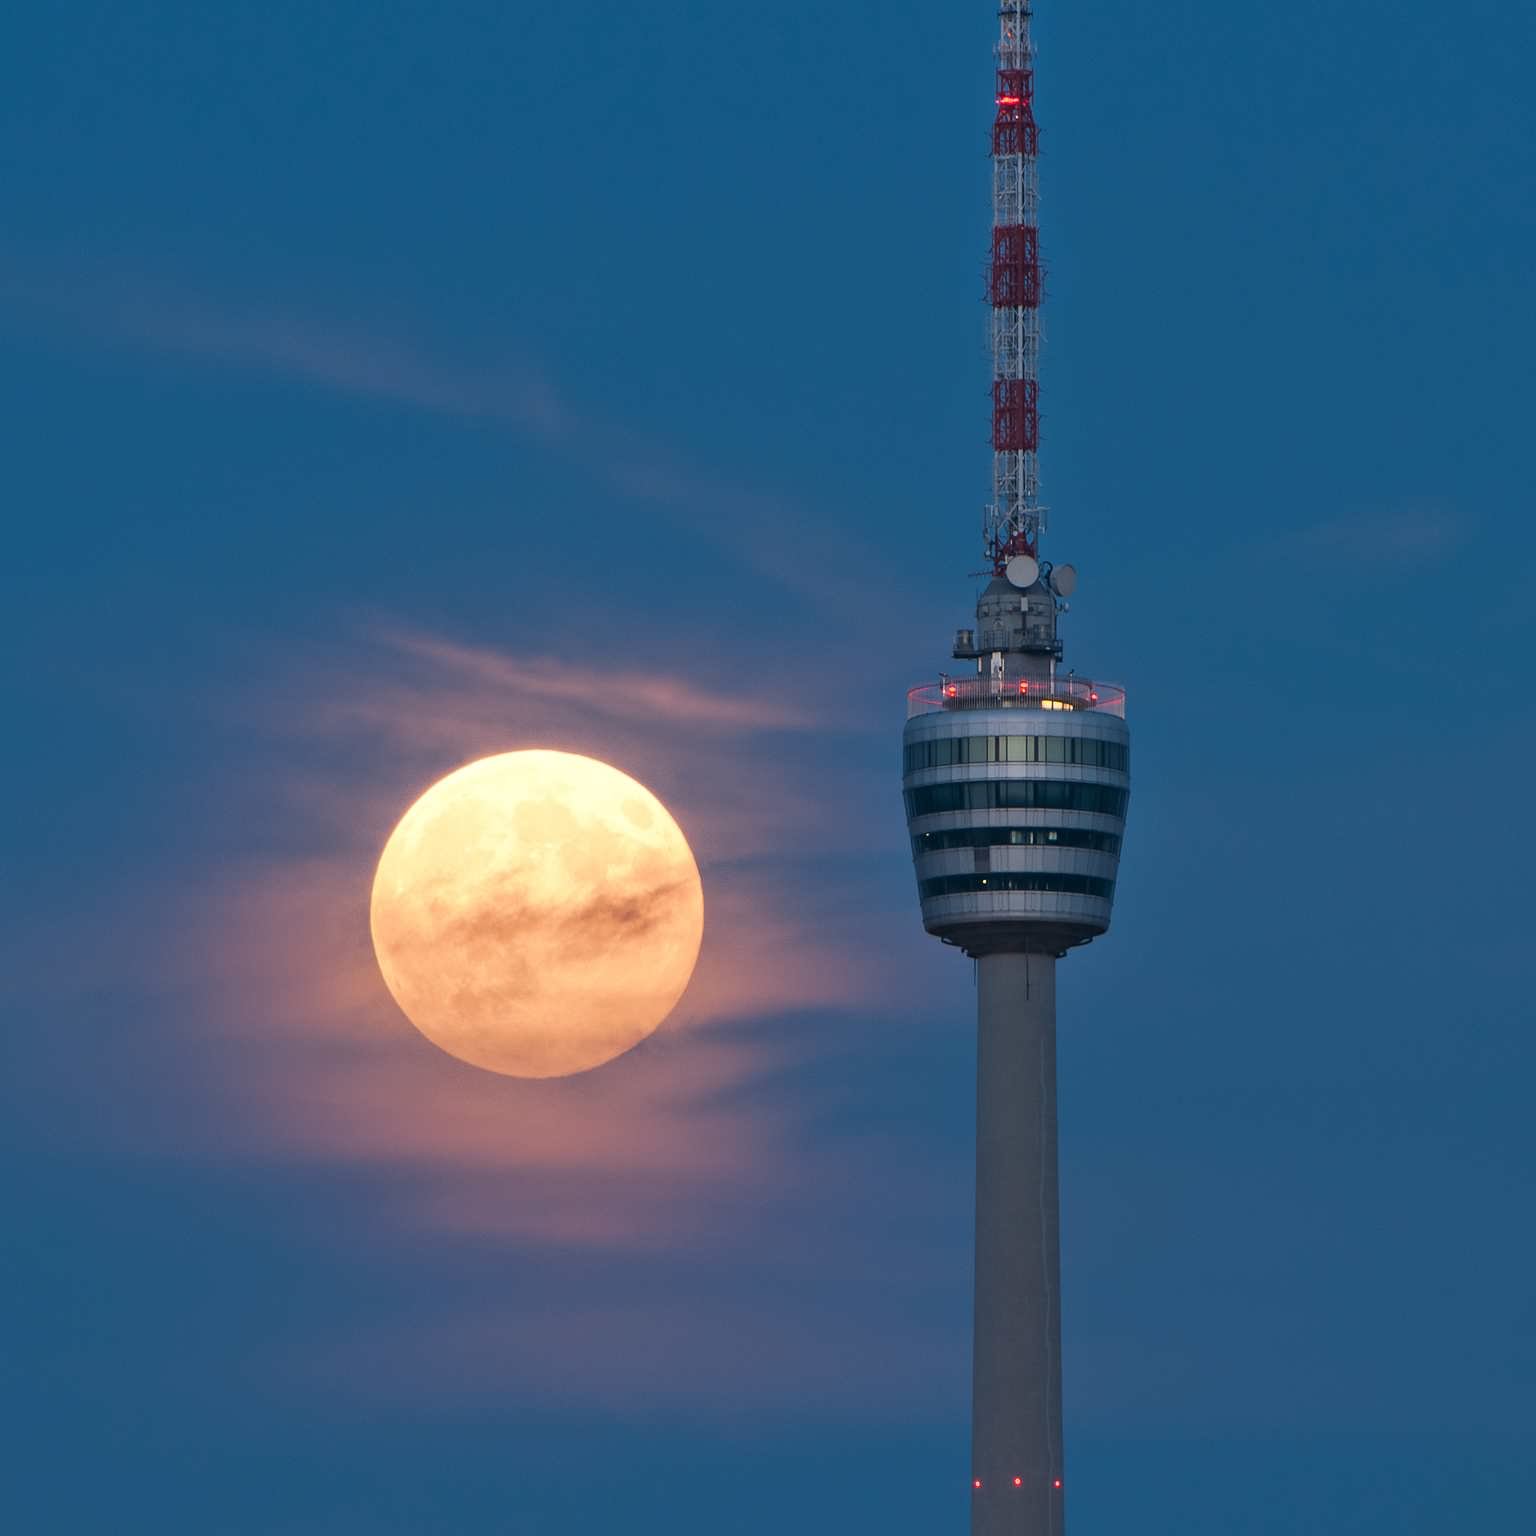 Amazing View Of The Fernsehturm Tower With Full Moon Picture